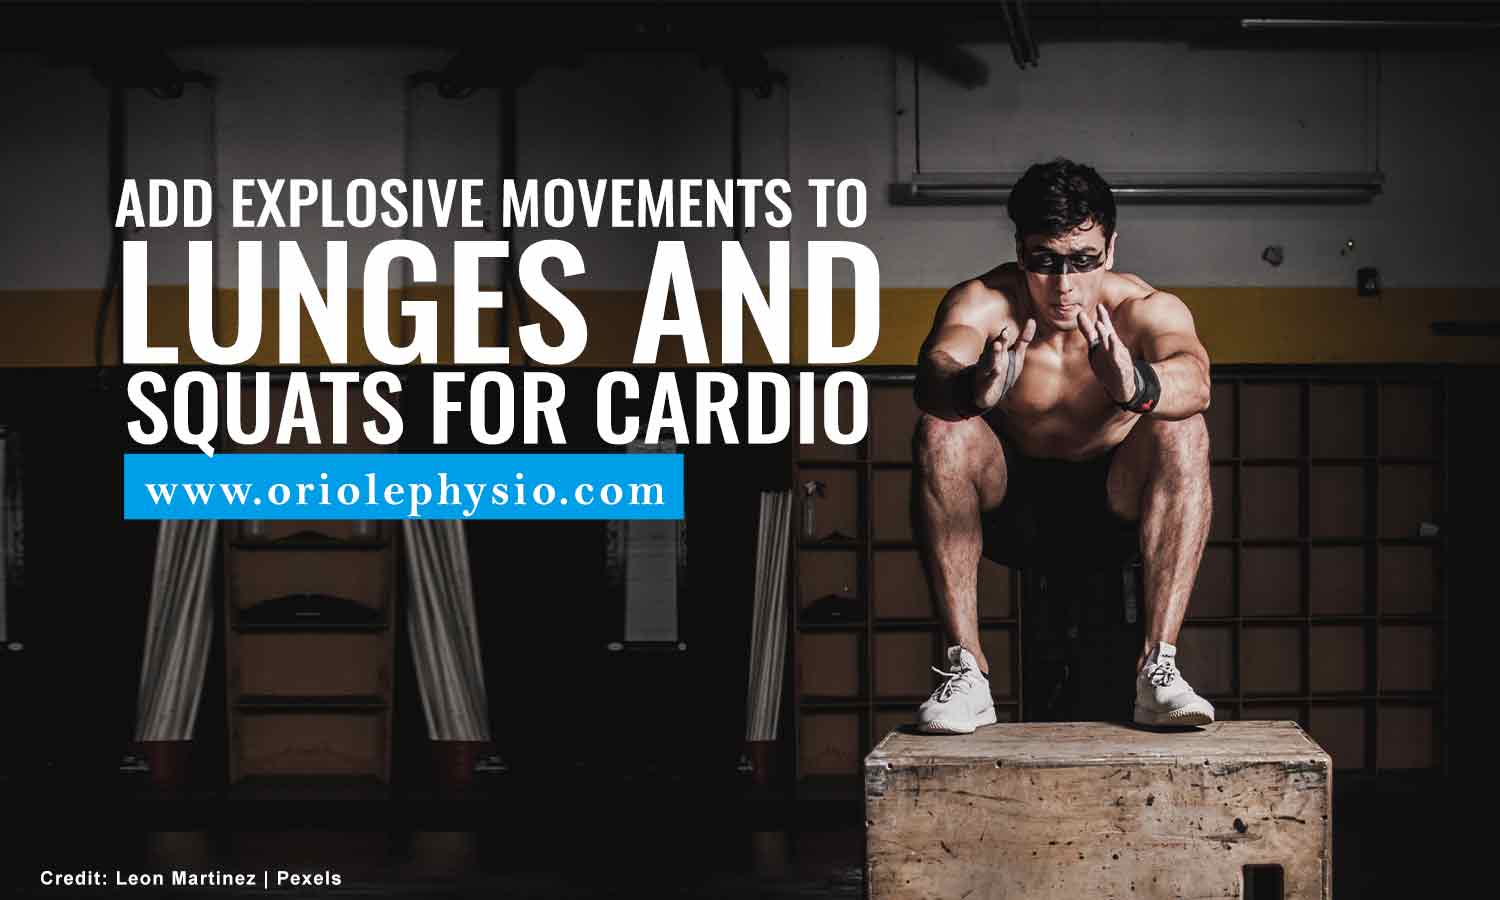 Add explosive movements to lunges and squats for cardio